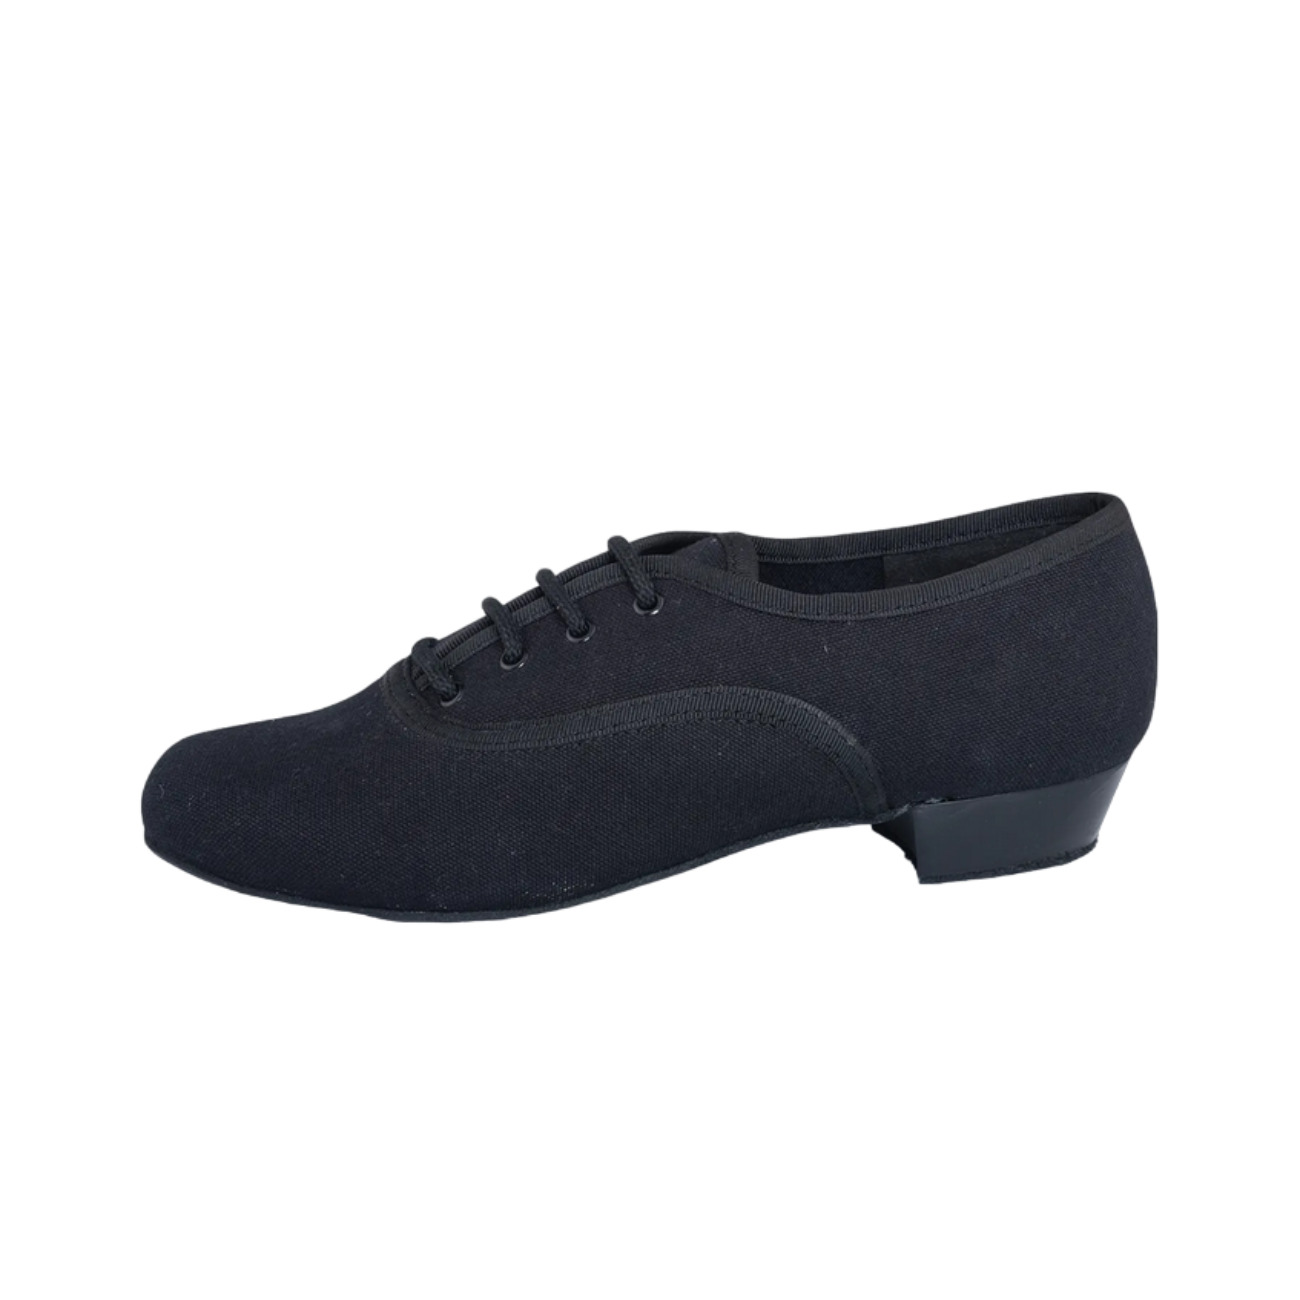 For Sale: 1st Position Boys Oxford Suede Sole Character Shoes